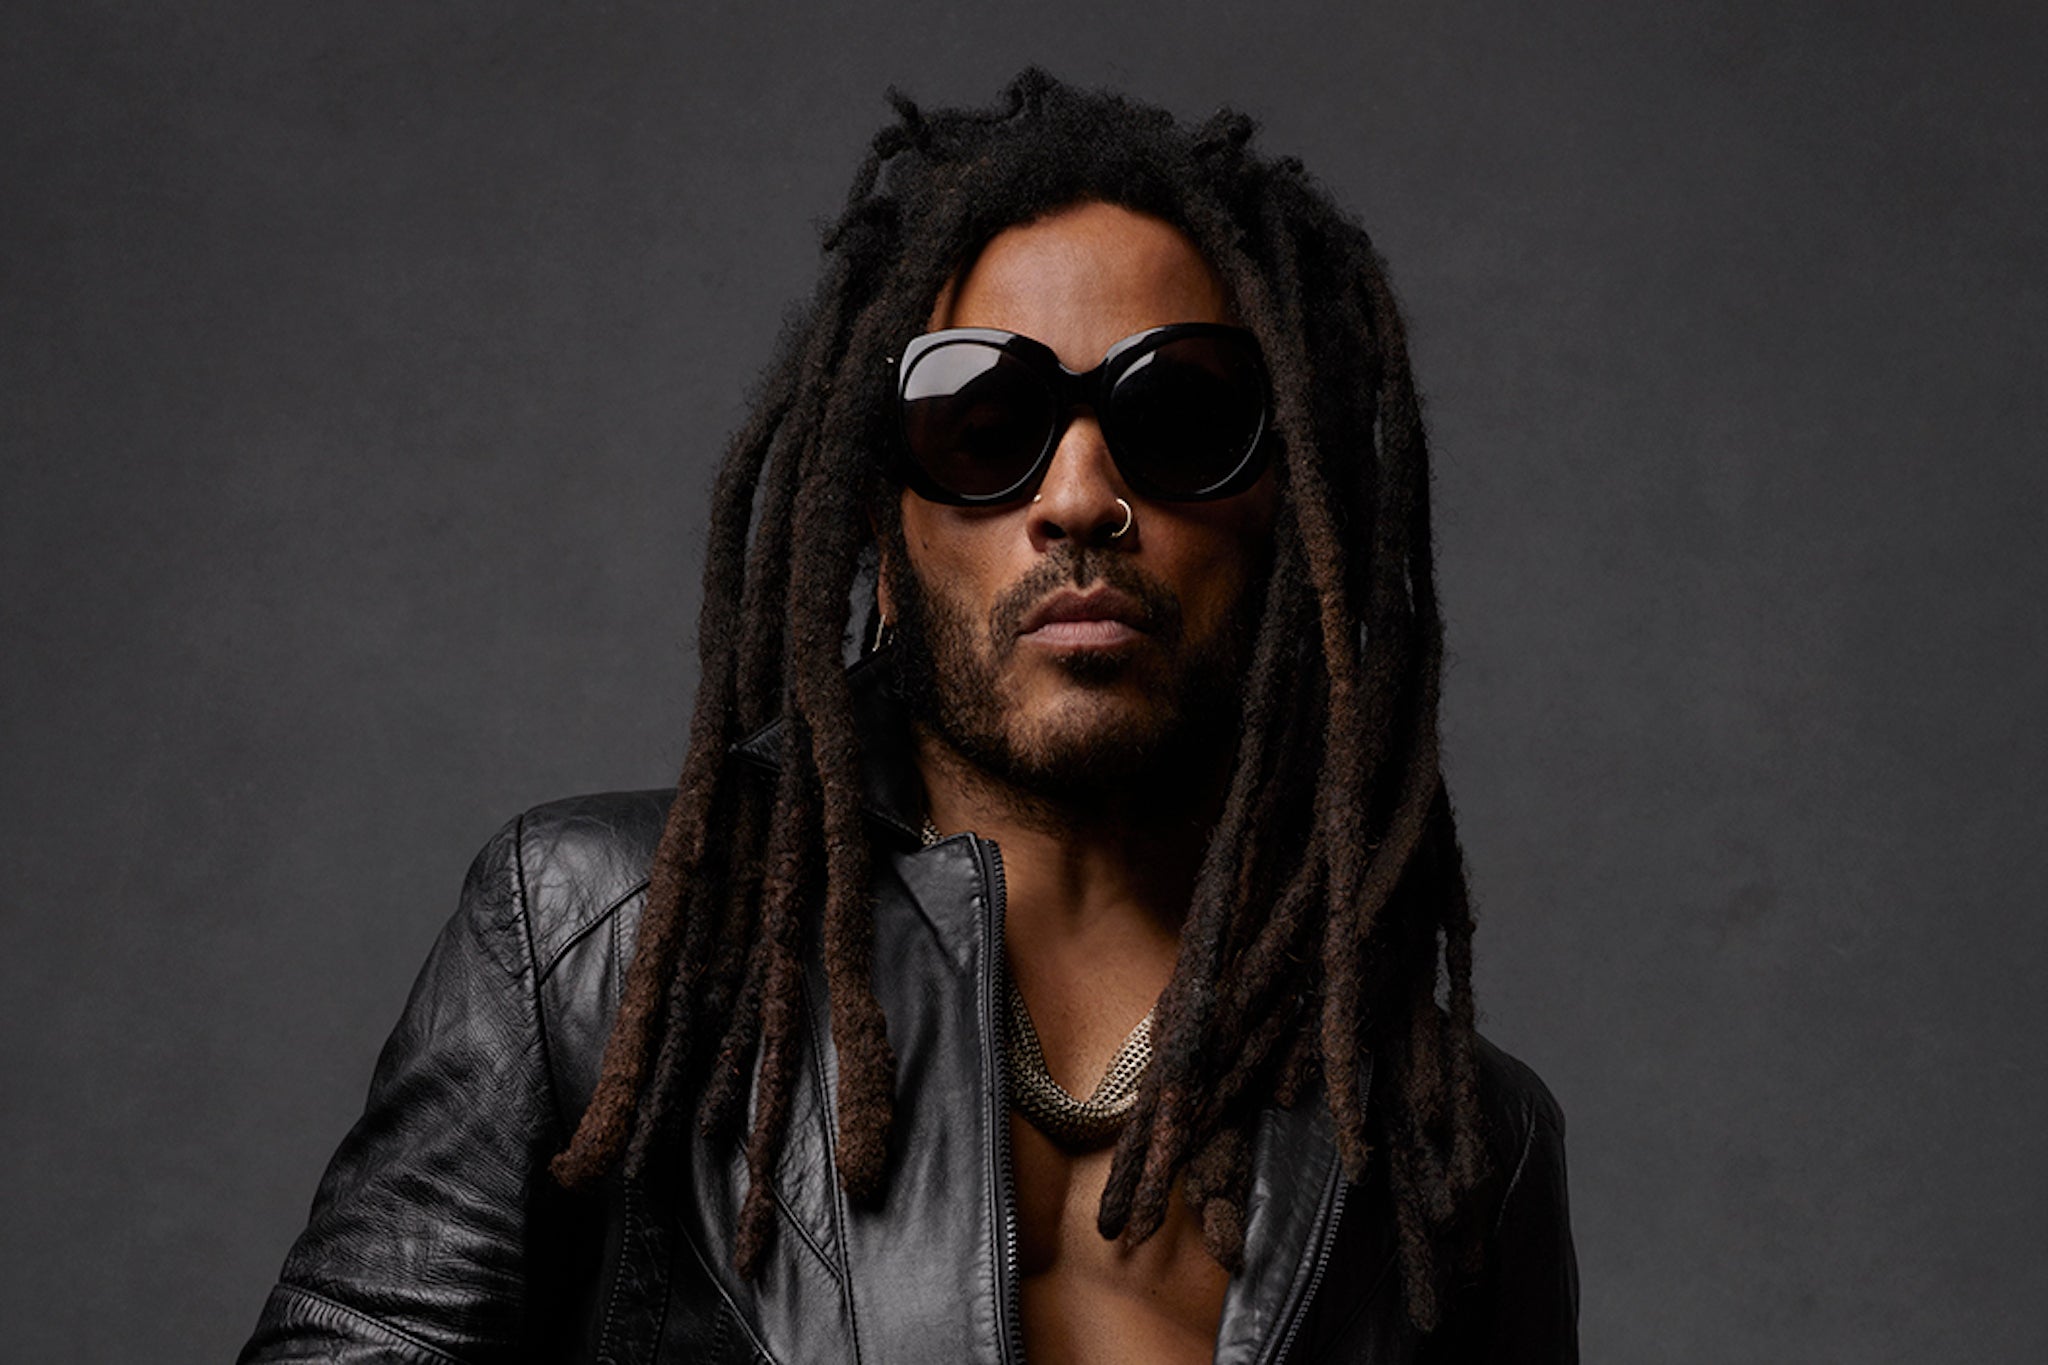 Lenny Kravitz releases his 12th studio album ‘Blue Electric Light’ on 24 May